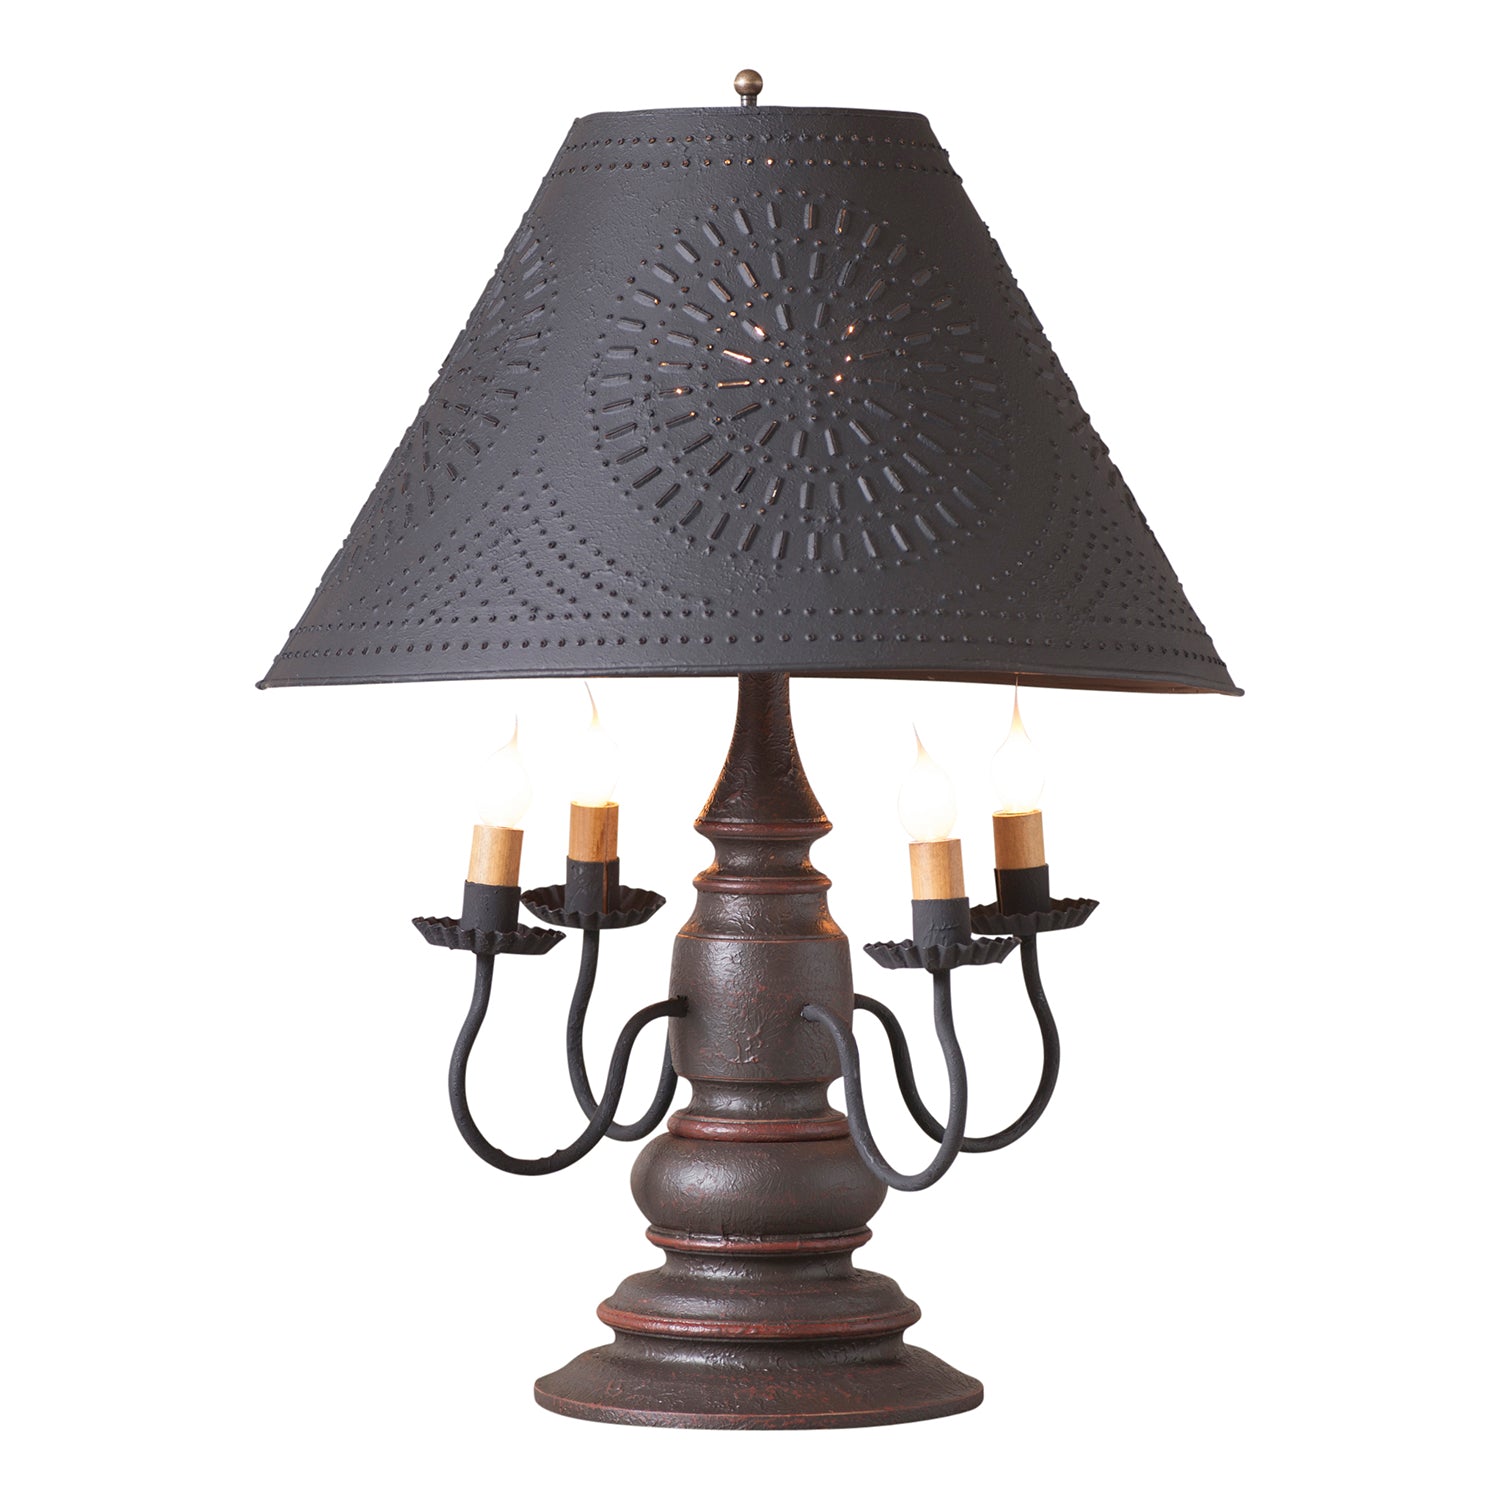 Harrison Lamp in Americana Espresso with Textured Black Tin Shade